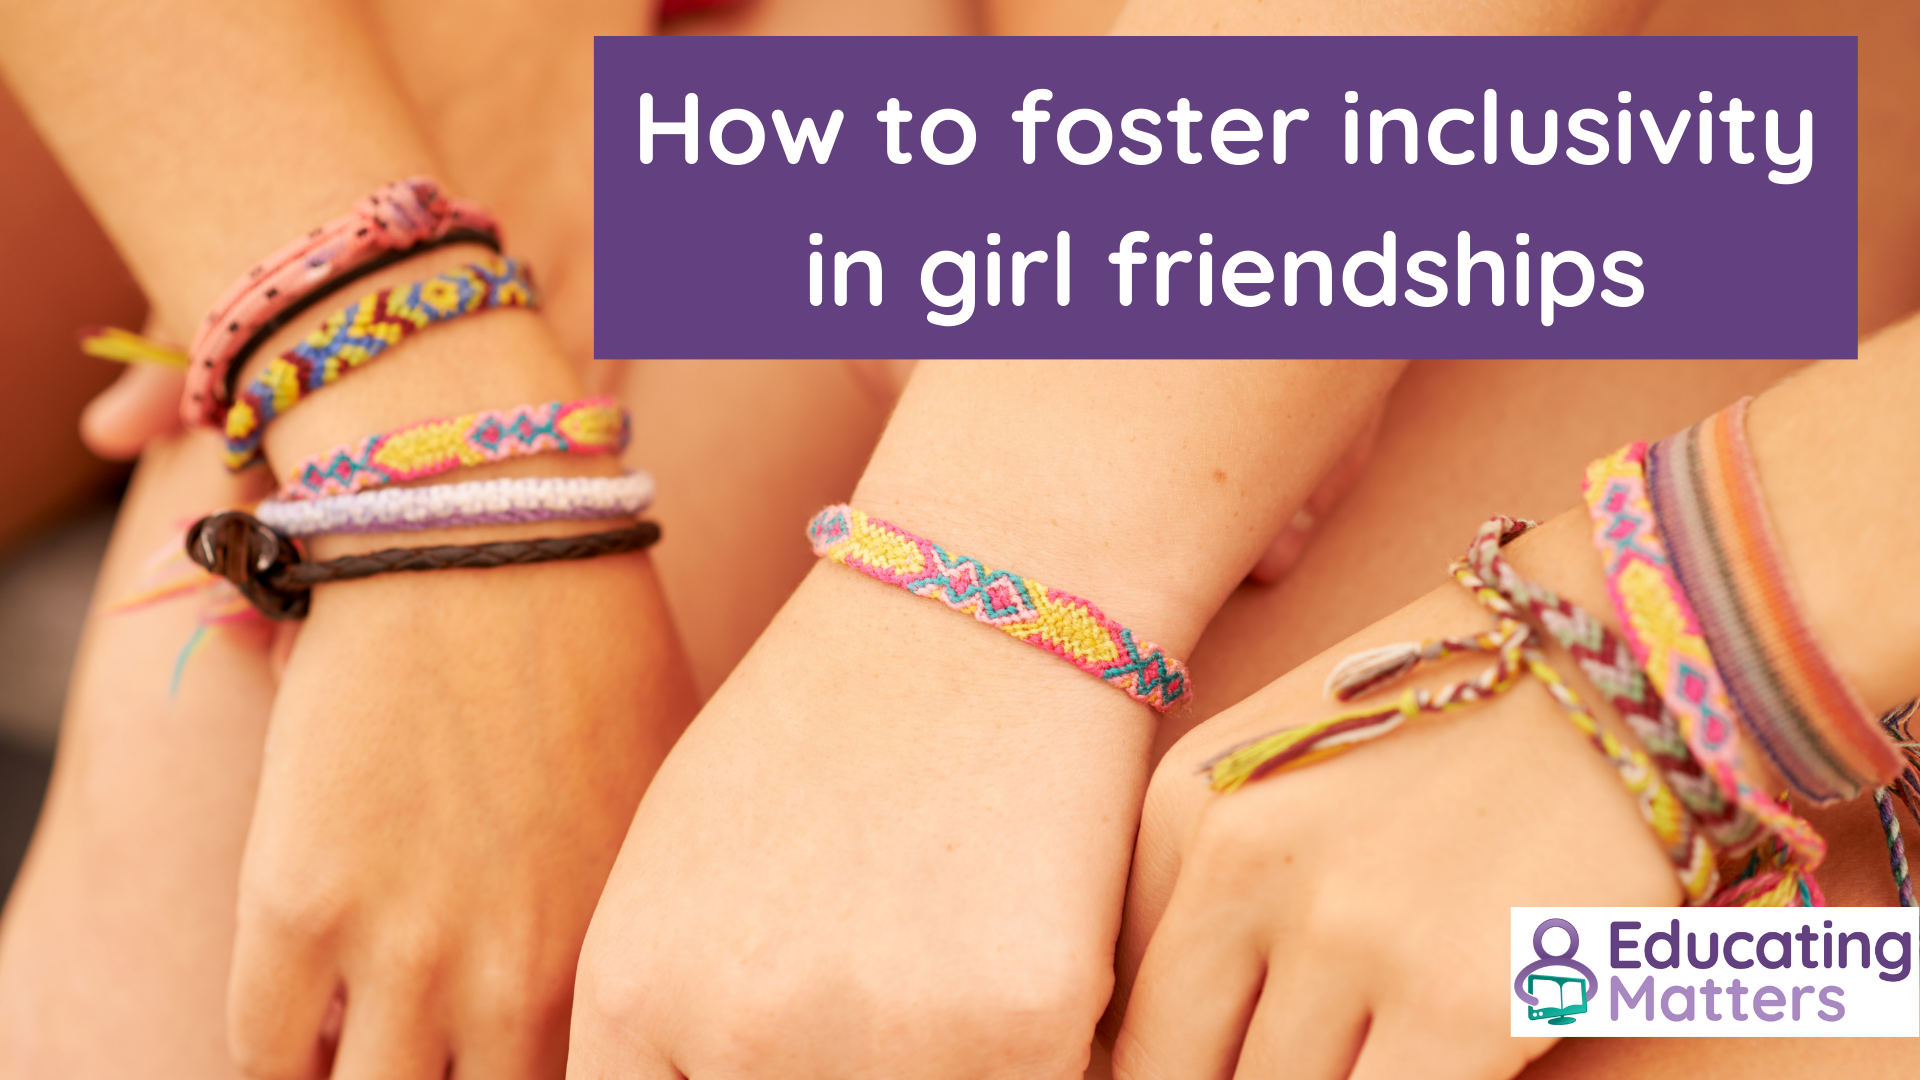 How to foster inclusivity & empowerment in girls’ friendships